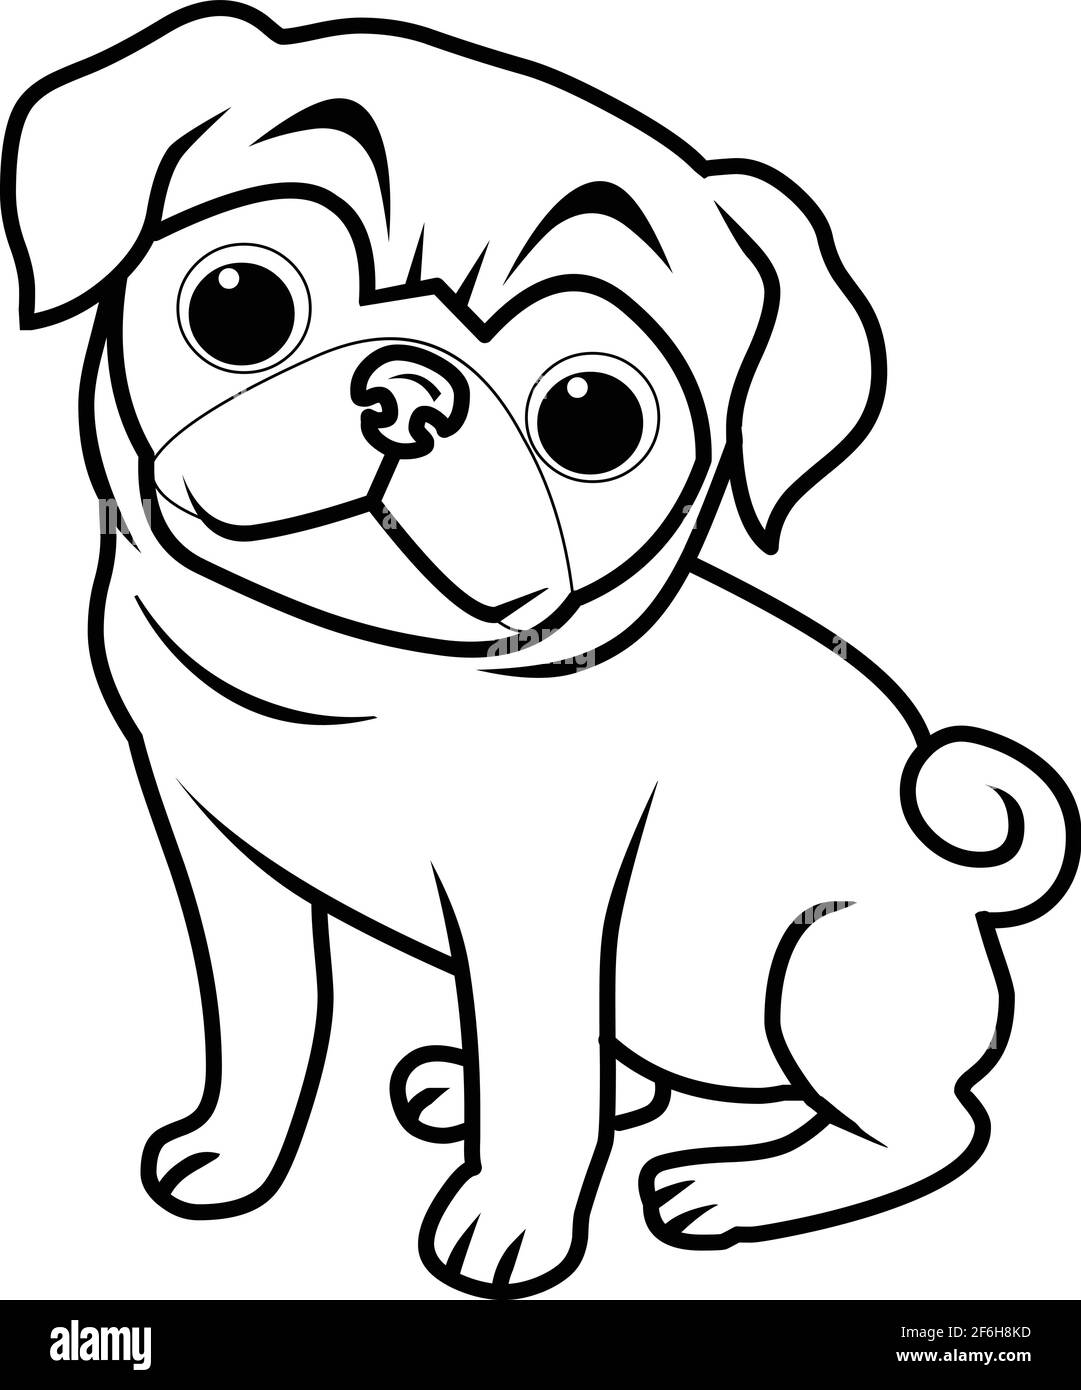 Pug Drawing Black and White Stock Photos & Images - Alamy